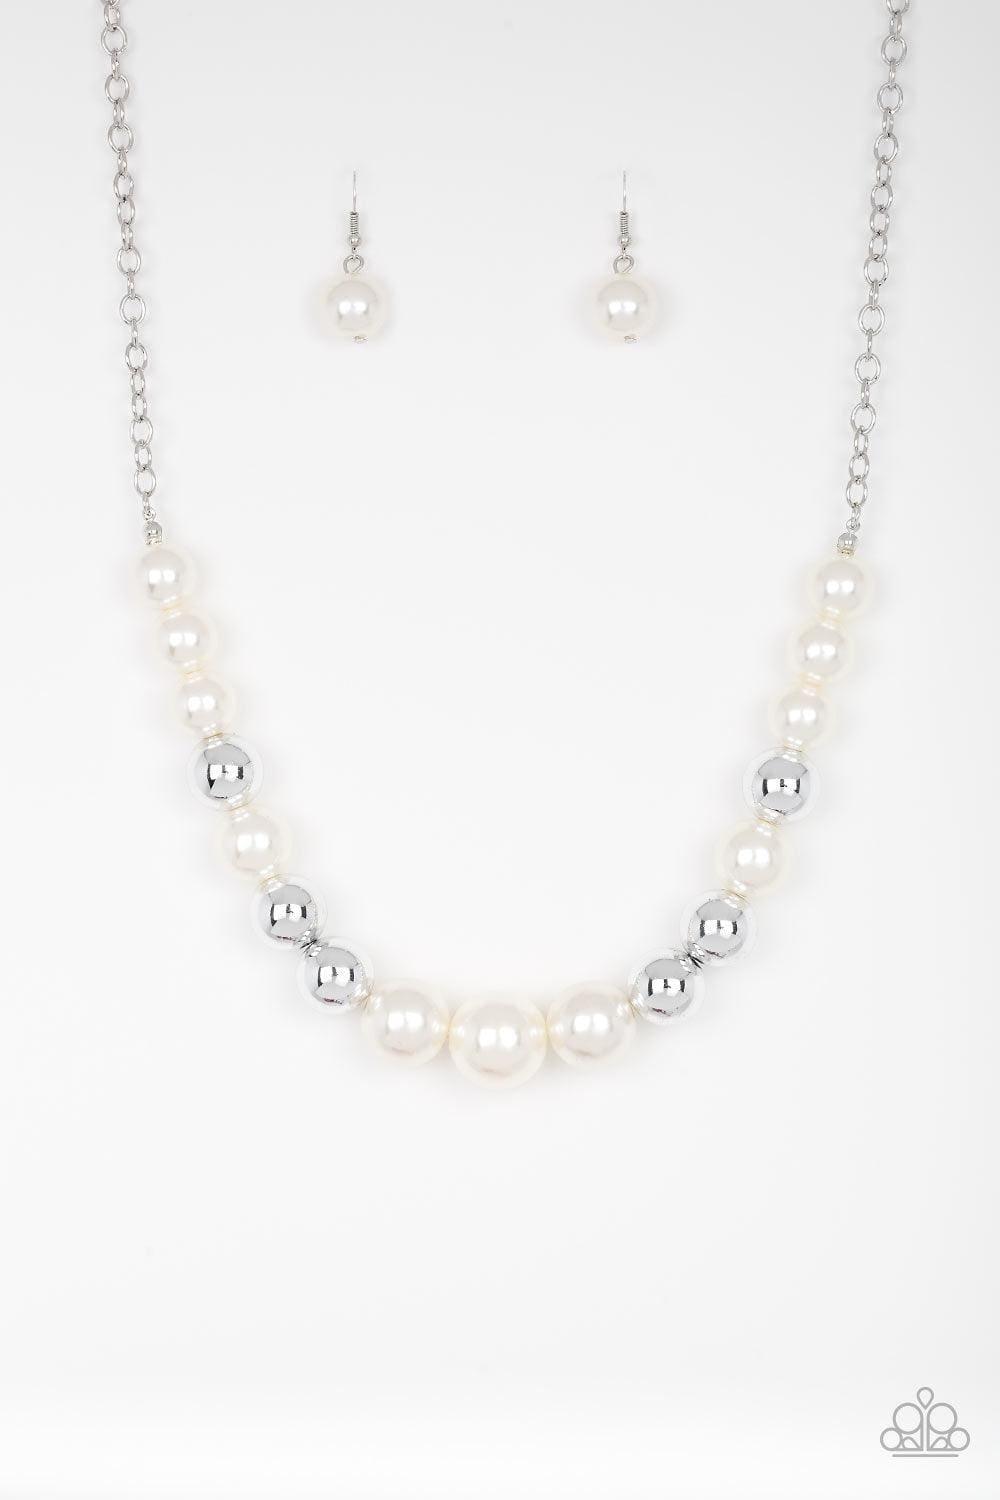 Paparazzi Accessories - Take Note - White Necklace - Bling by JessieK